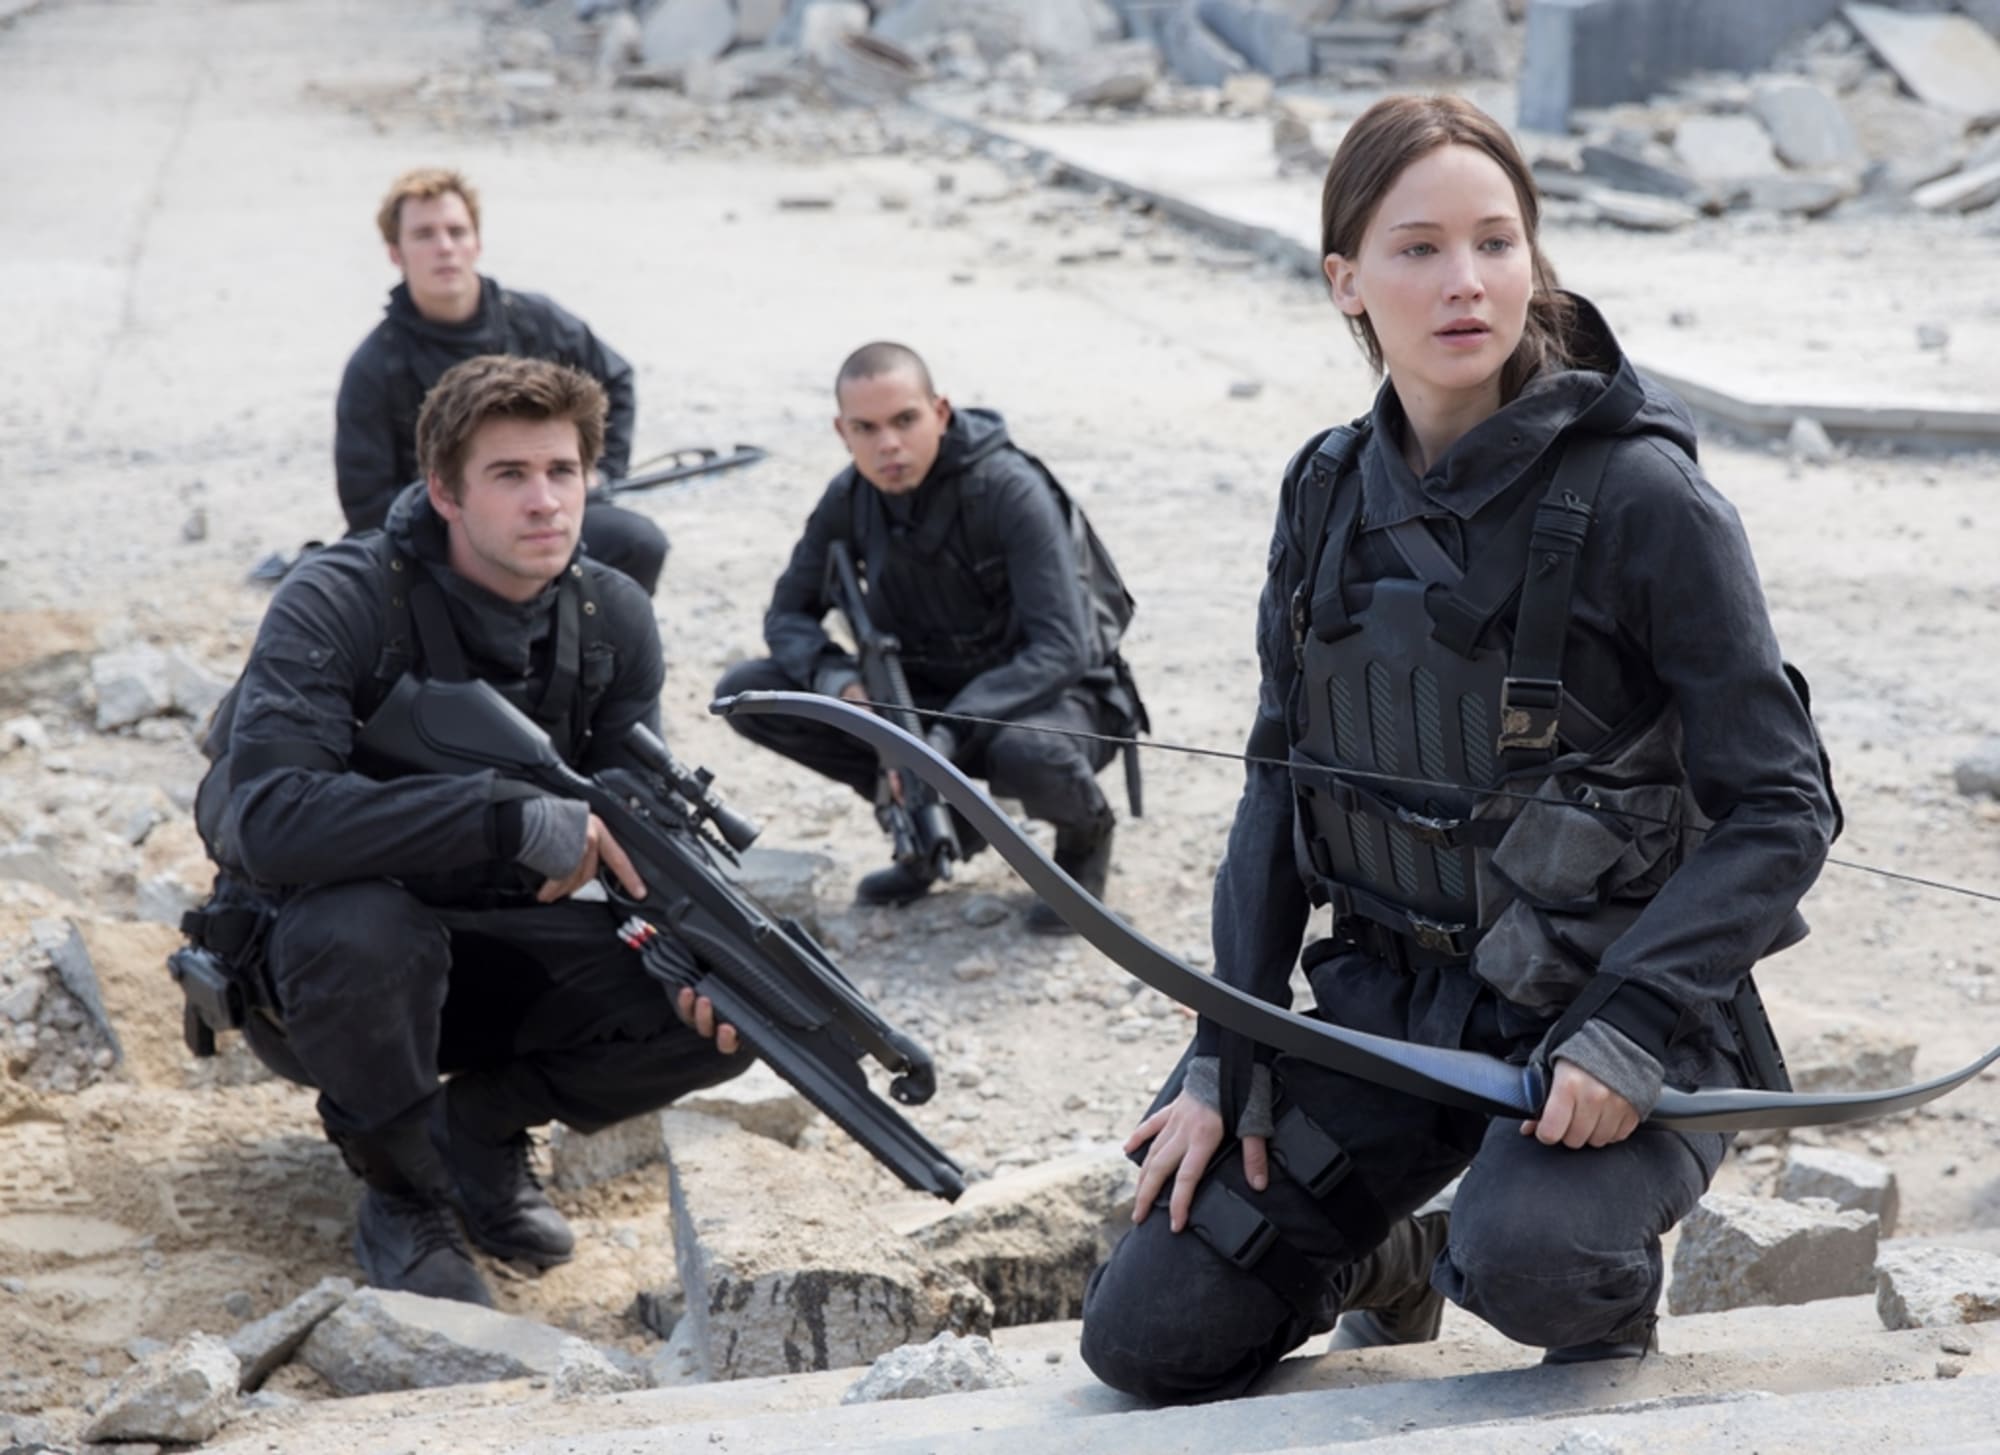 How to Watch All 'The Hunger Games' Films Online for Free